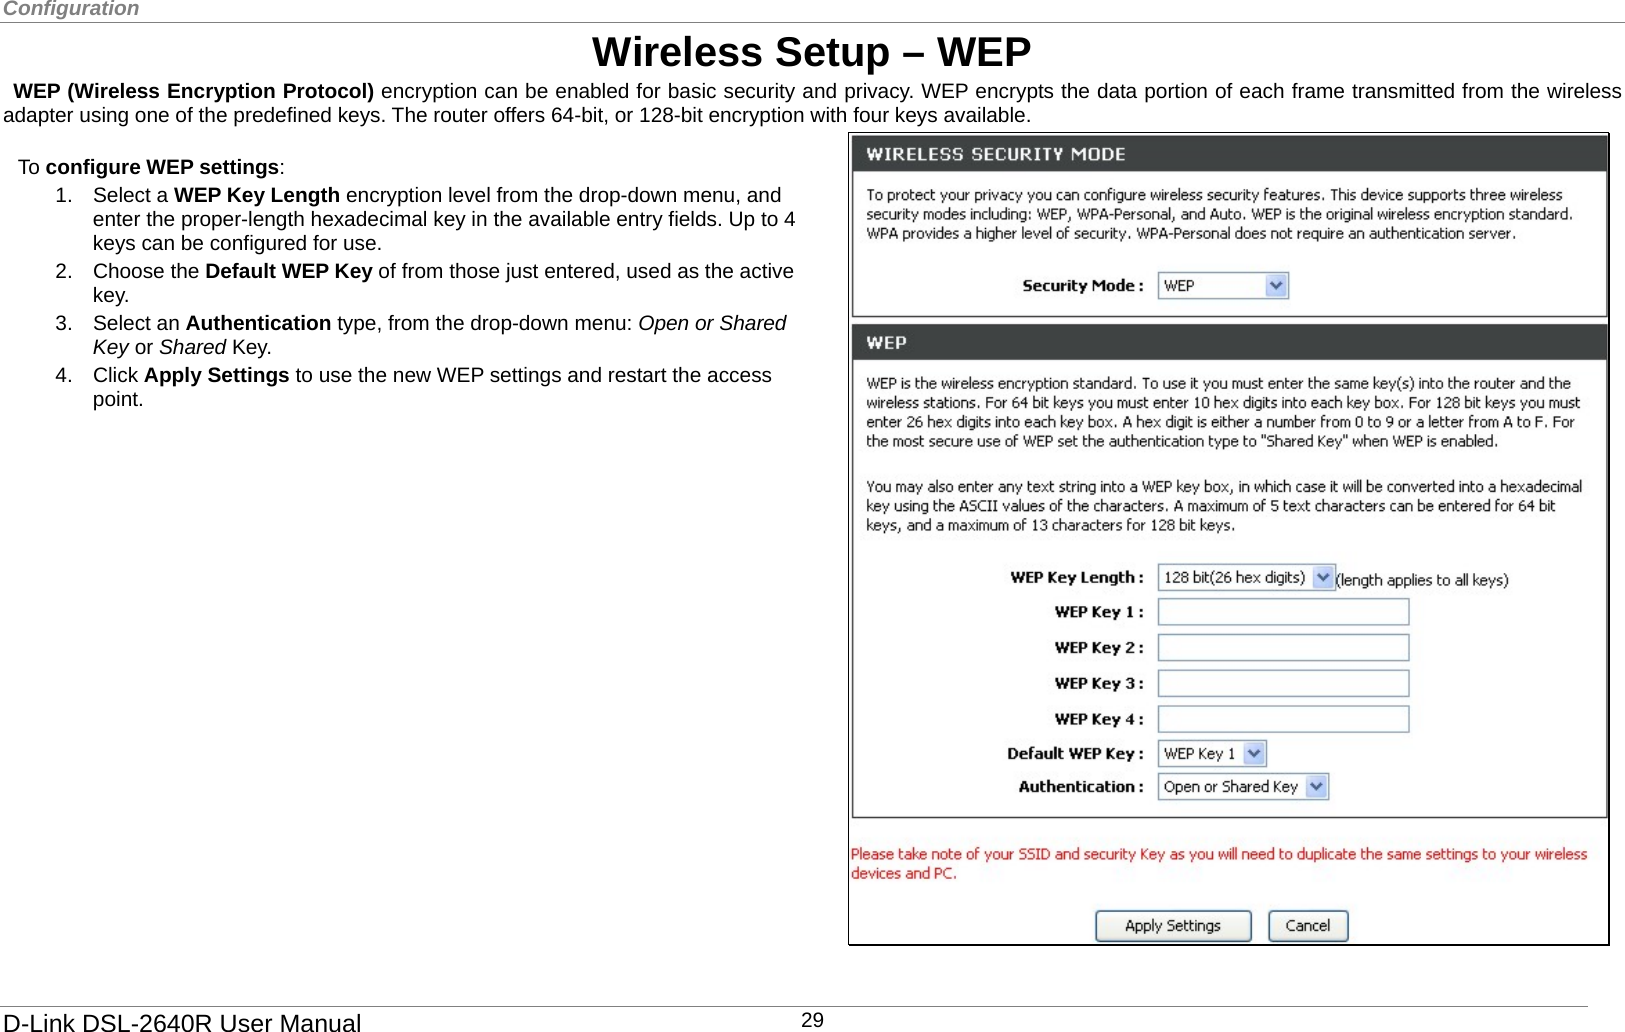 Configuration  Wireless Setup – WEP  WEP (Wireless Encryption Protocol) encryption can be enabled for basic security and privacy. WEP encrypts the data portion of each frame transmitted from the wireless adapter using one of the predefined keys. The router offers 64-bit, or 128-bit encryption with four keys available.  To configure WEP settings: 1. Select a WEP Key Length encryption level from the drop-down menu, and enter the proper-length hexadecimal key in the available entry fields. Up to 4 keys can be configured for use.   2. Choose the Default WEP Key of from those just entered, used as the active key. 3. Select an Authentication type, from the drop-down menu: Open or Shared Key or Shared Key. 4. Click Apply Settings to use the new WEP settings and restart the access point.   D-Link DSL-2640R User Manual 29